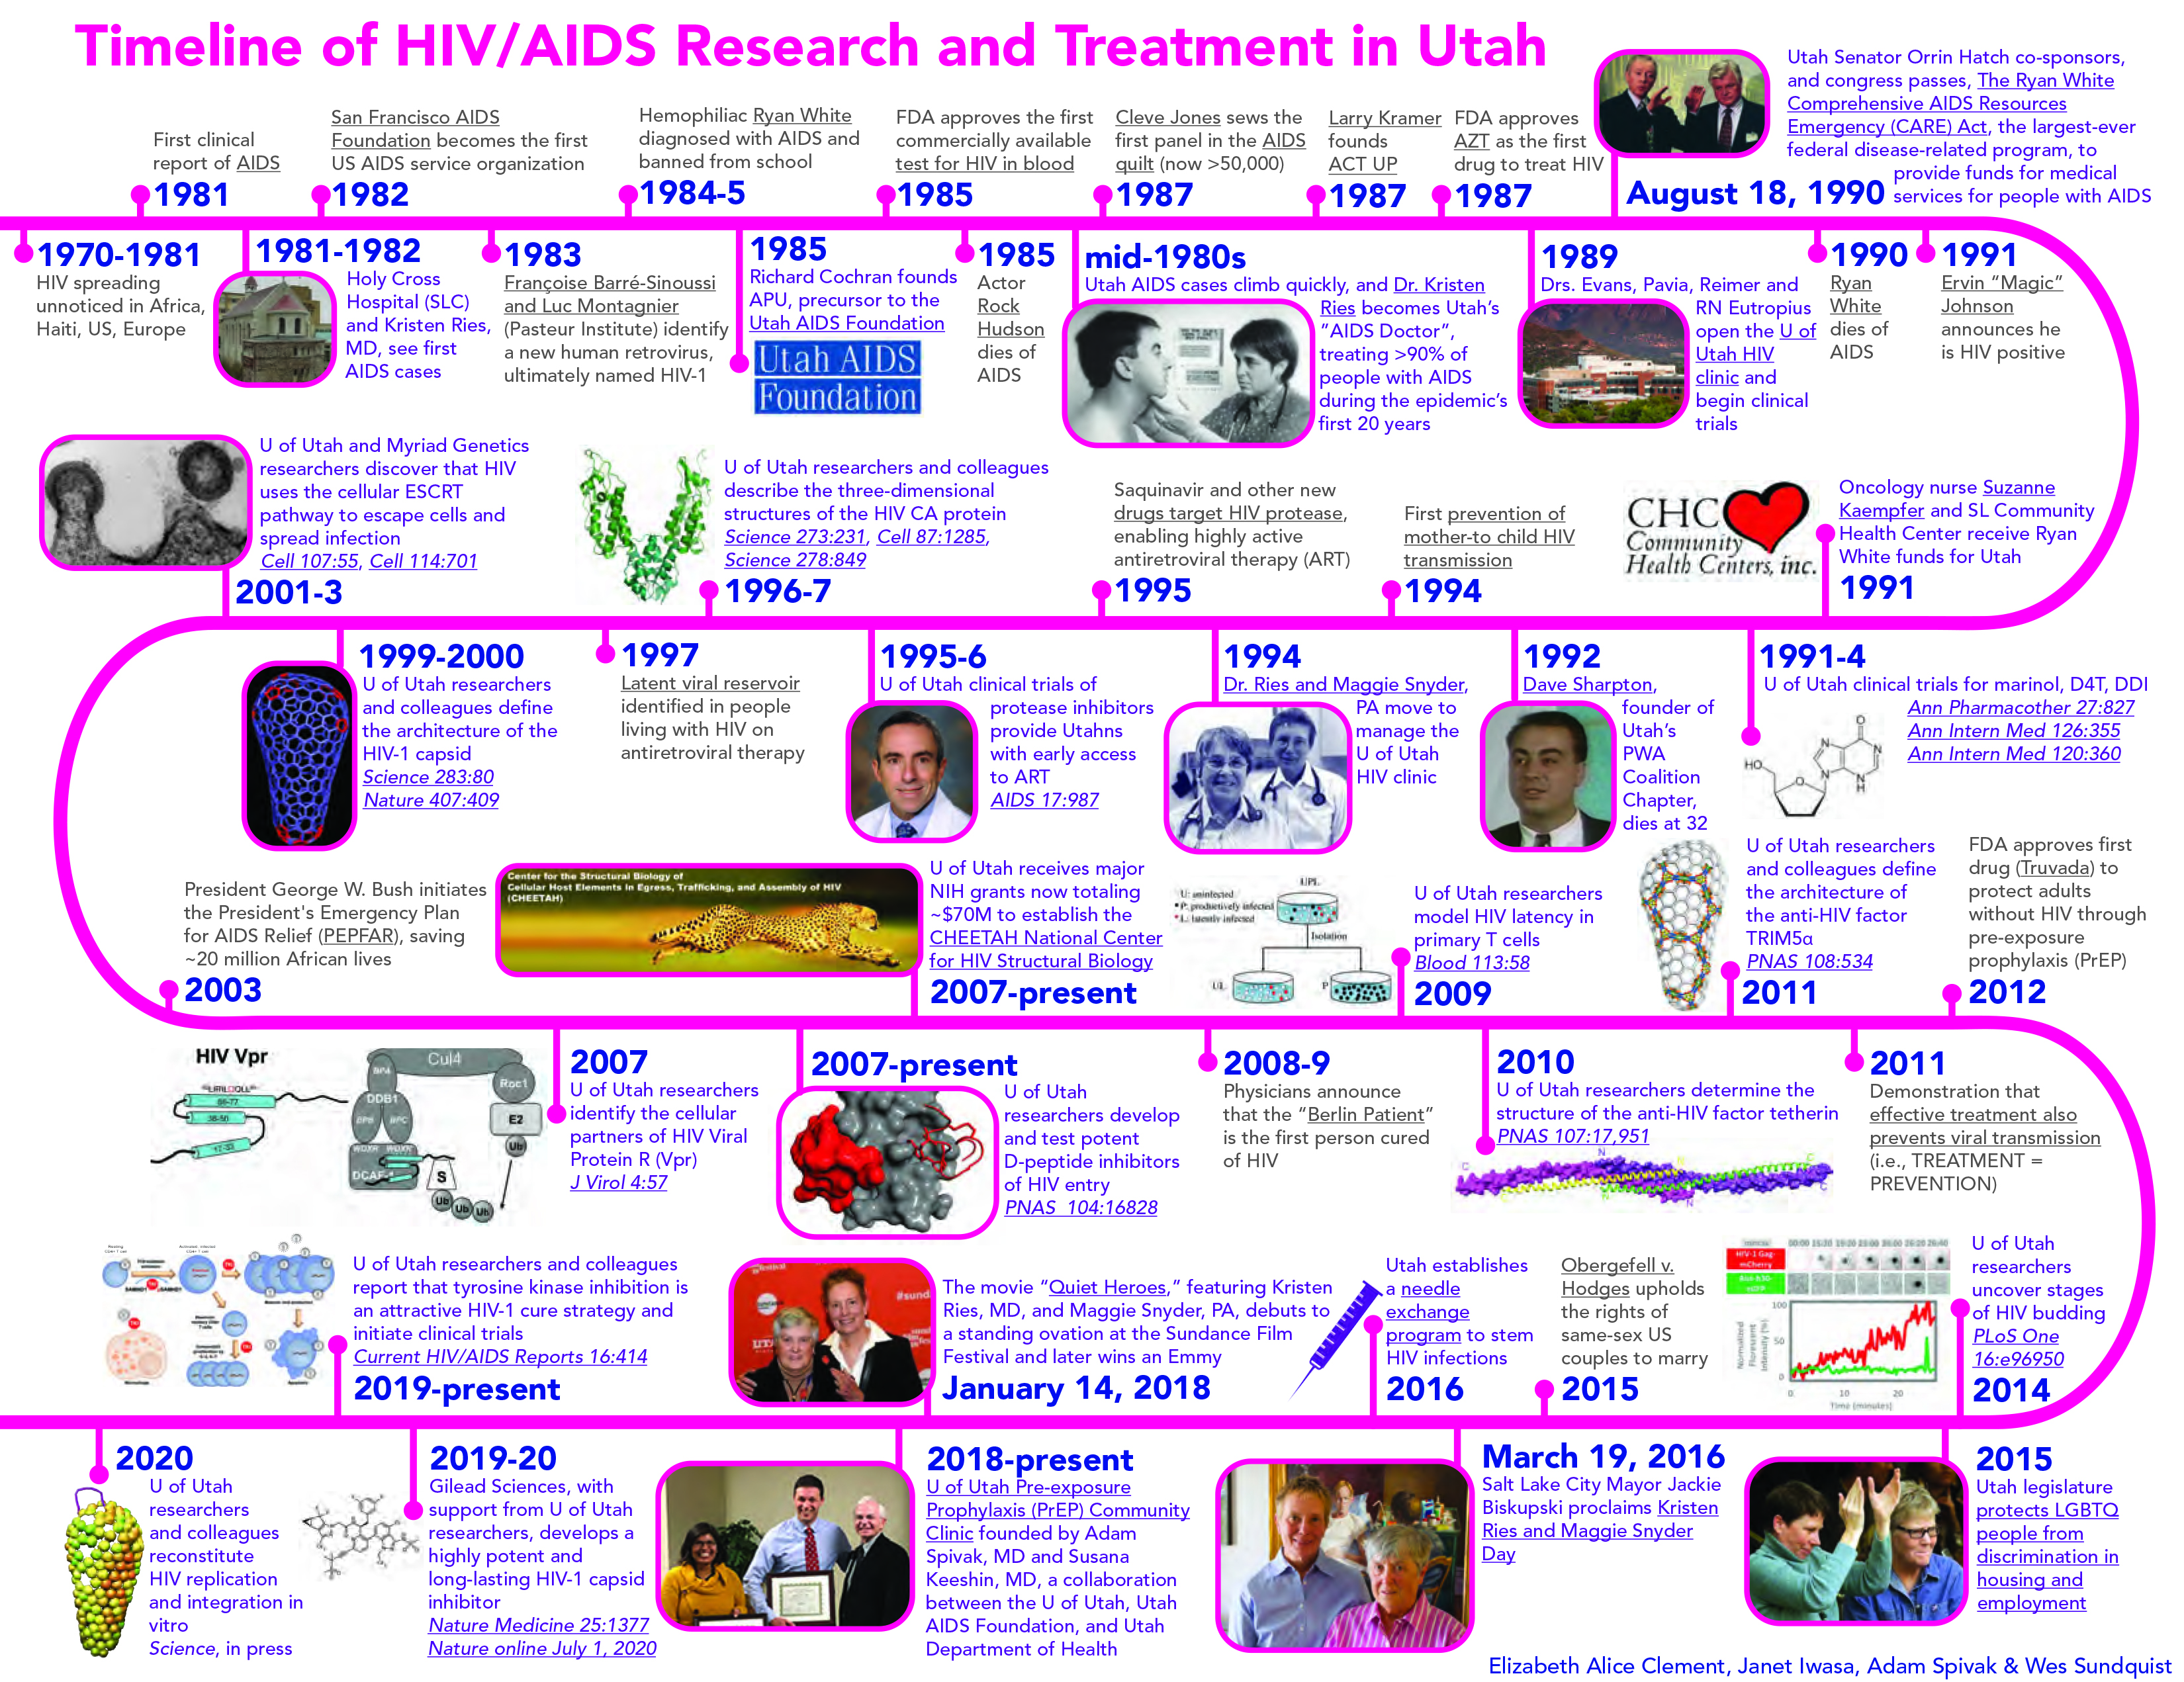 Timeline of AIDS/HIV care and research in Utah